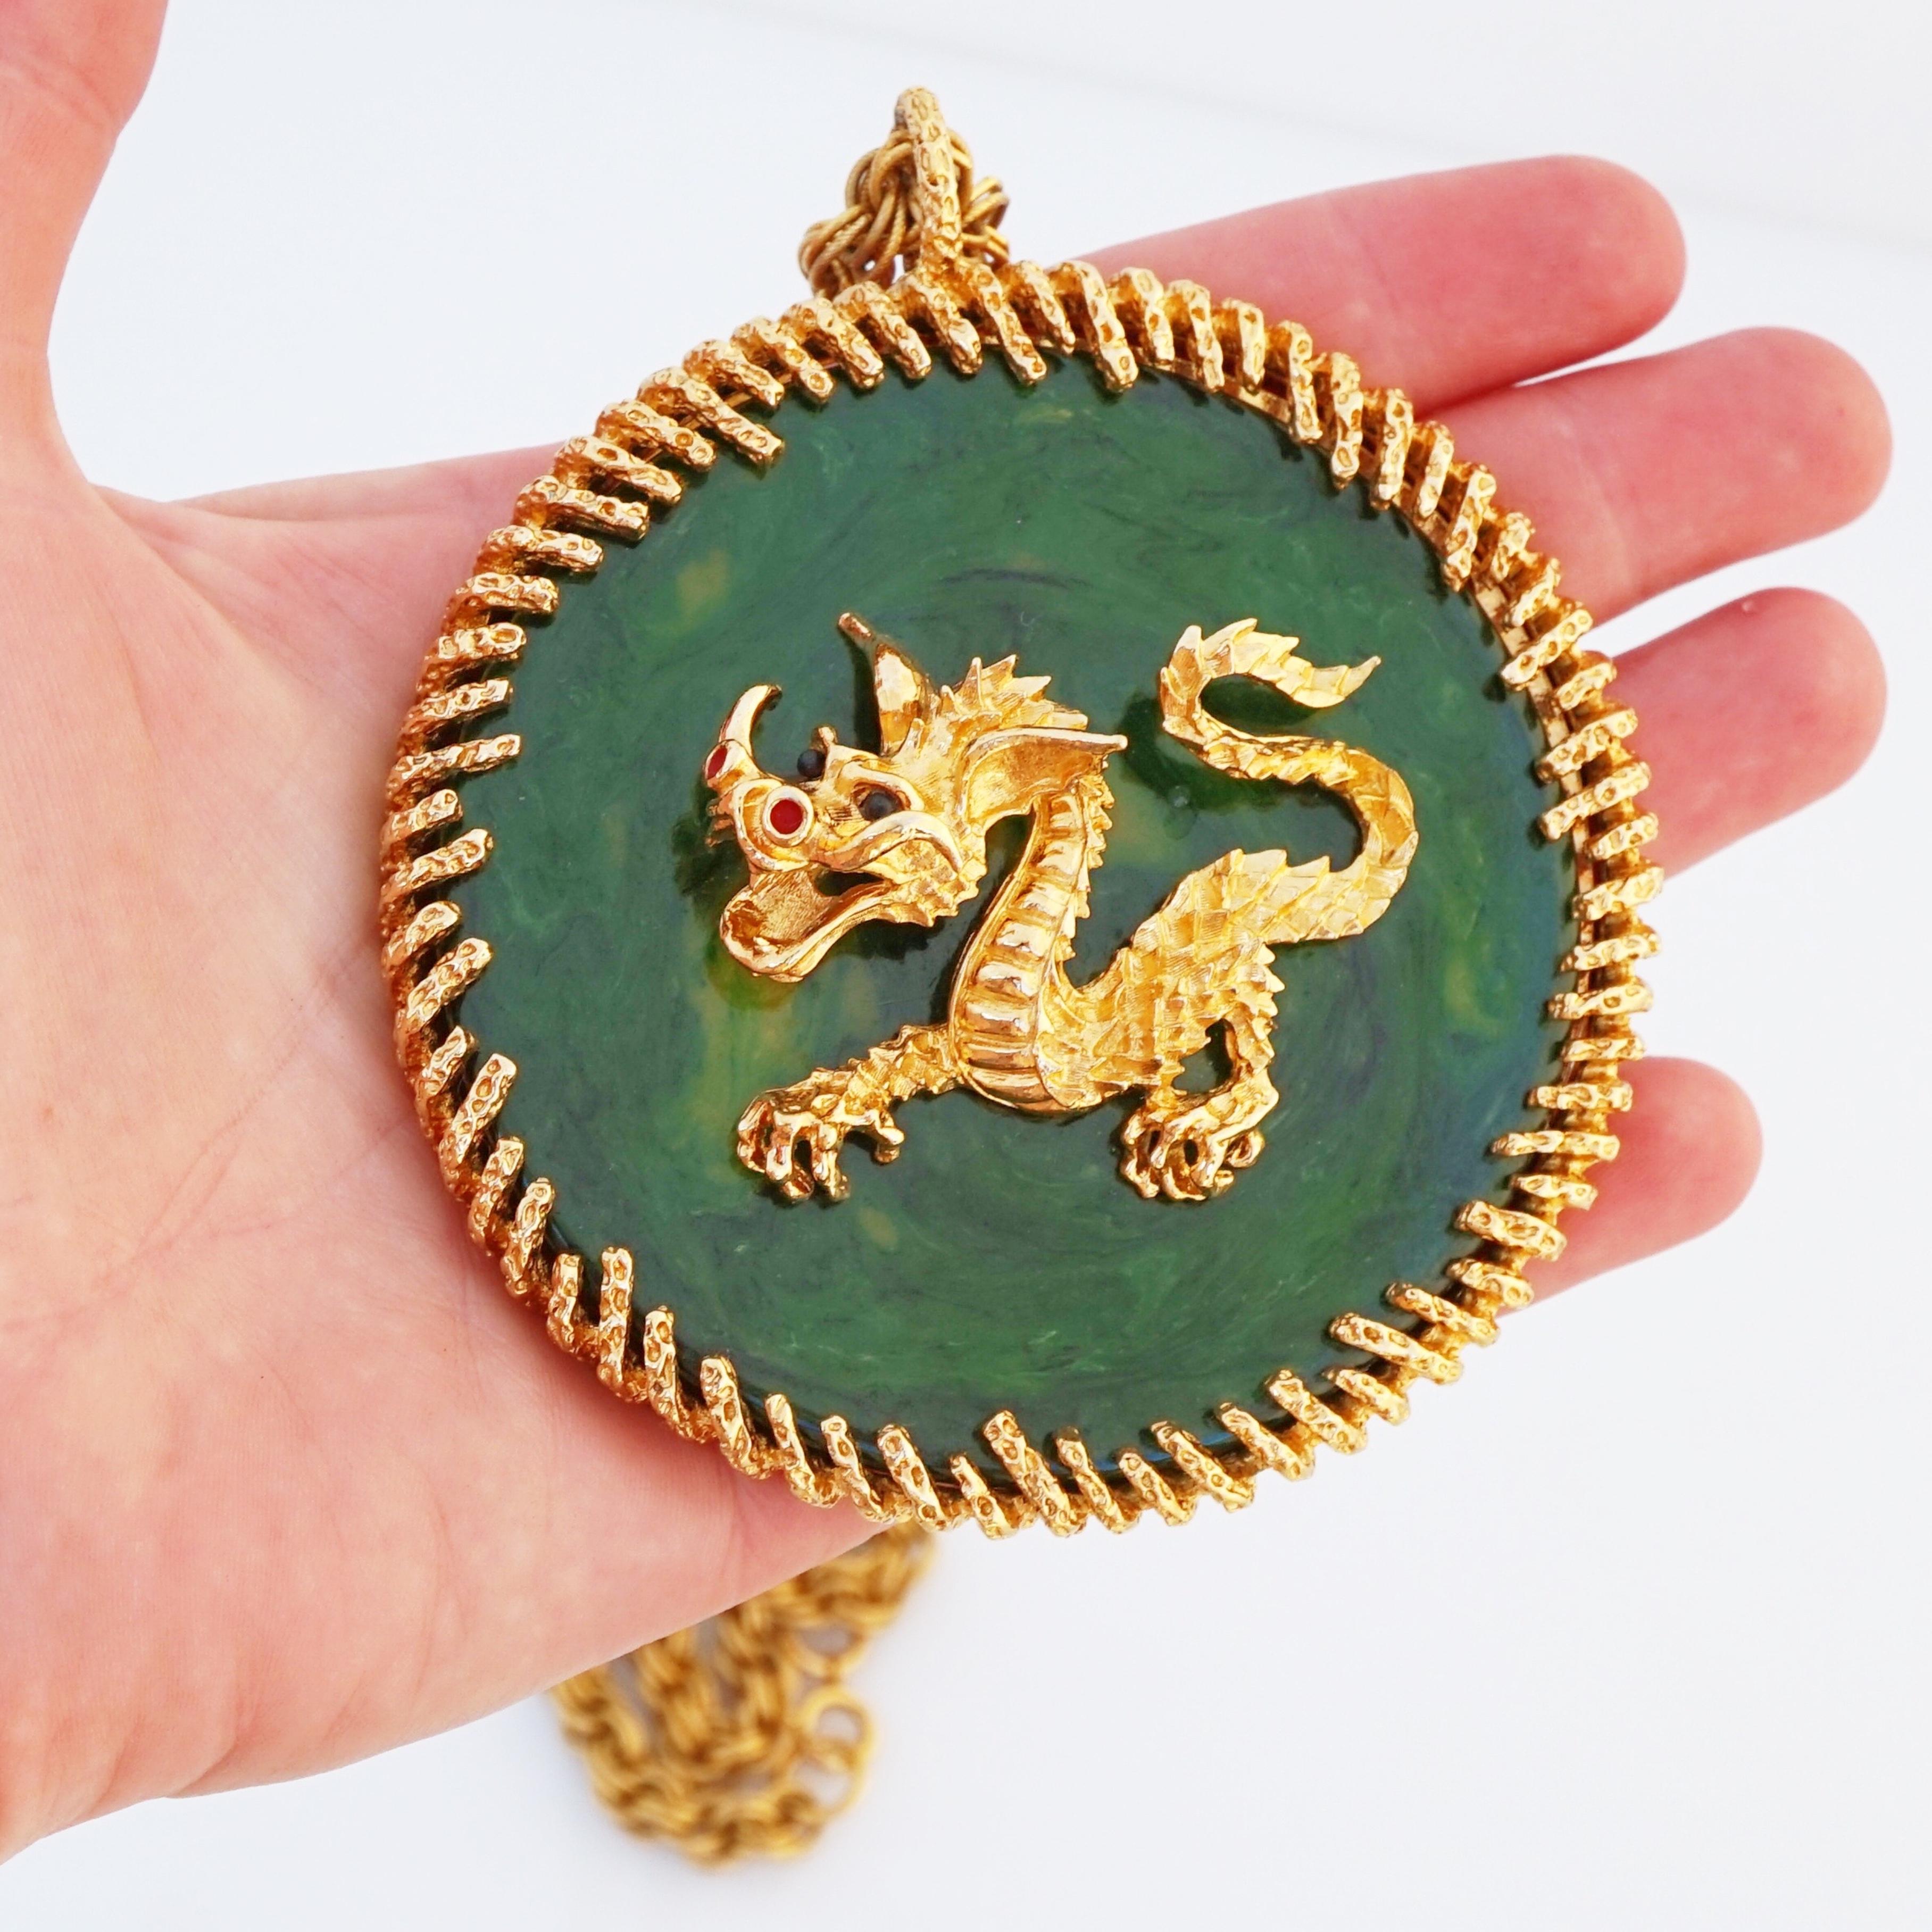 Massive Runway Jade Resin Dragon Pendant Necklace By Panetta, 1970s For Sale 3